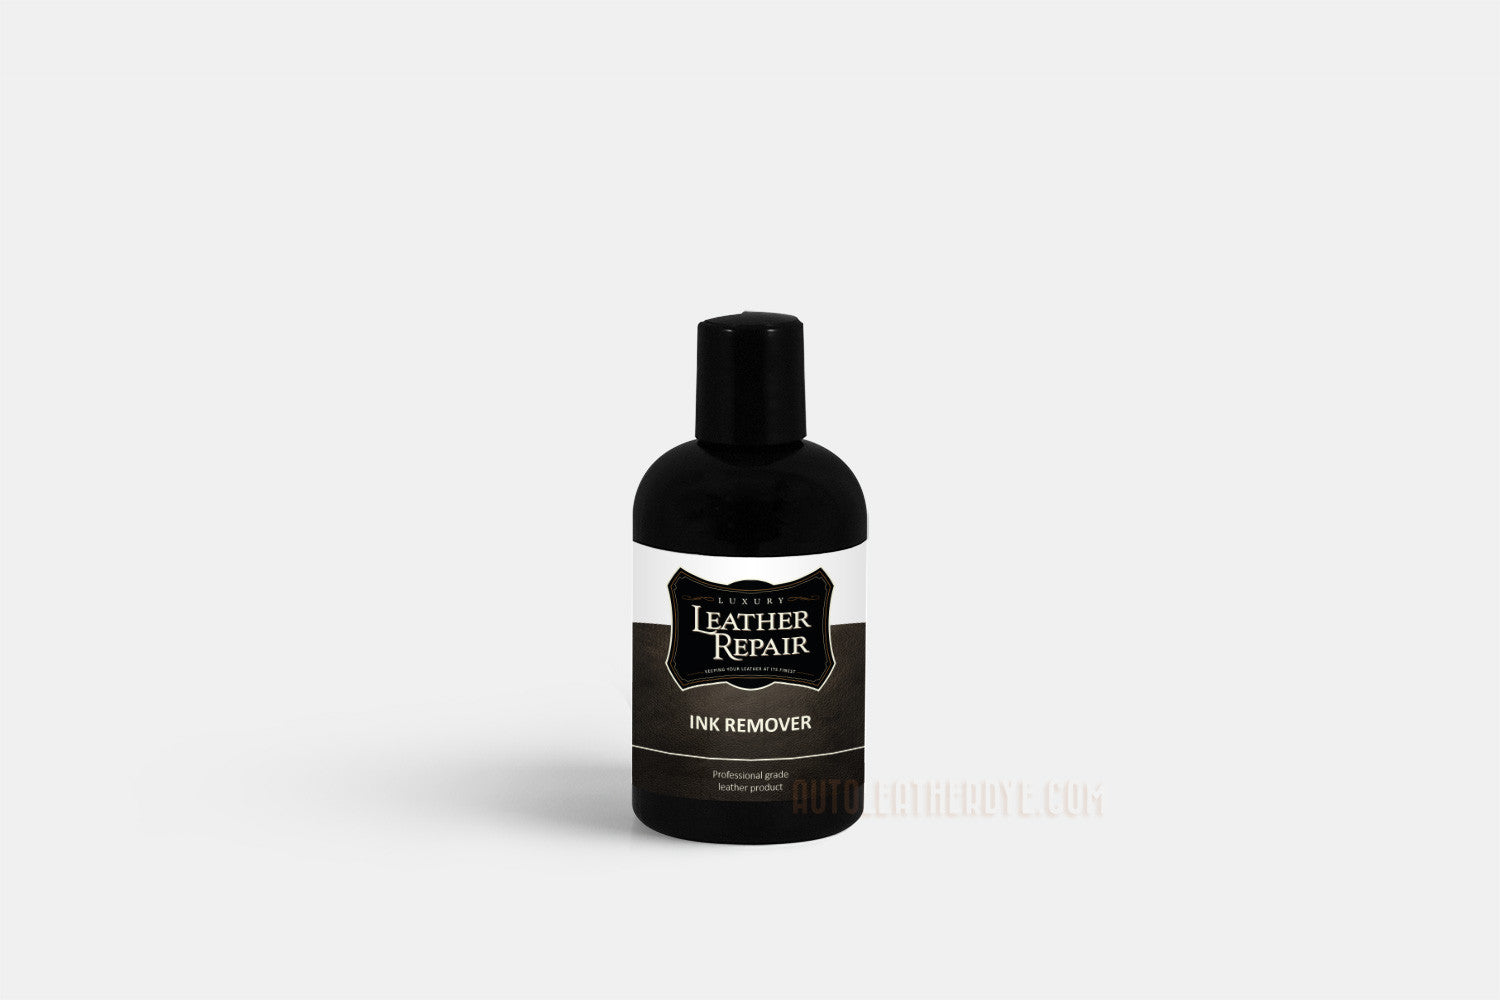 Ink And Stain Remover For Leather - Dye Transfer Remover